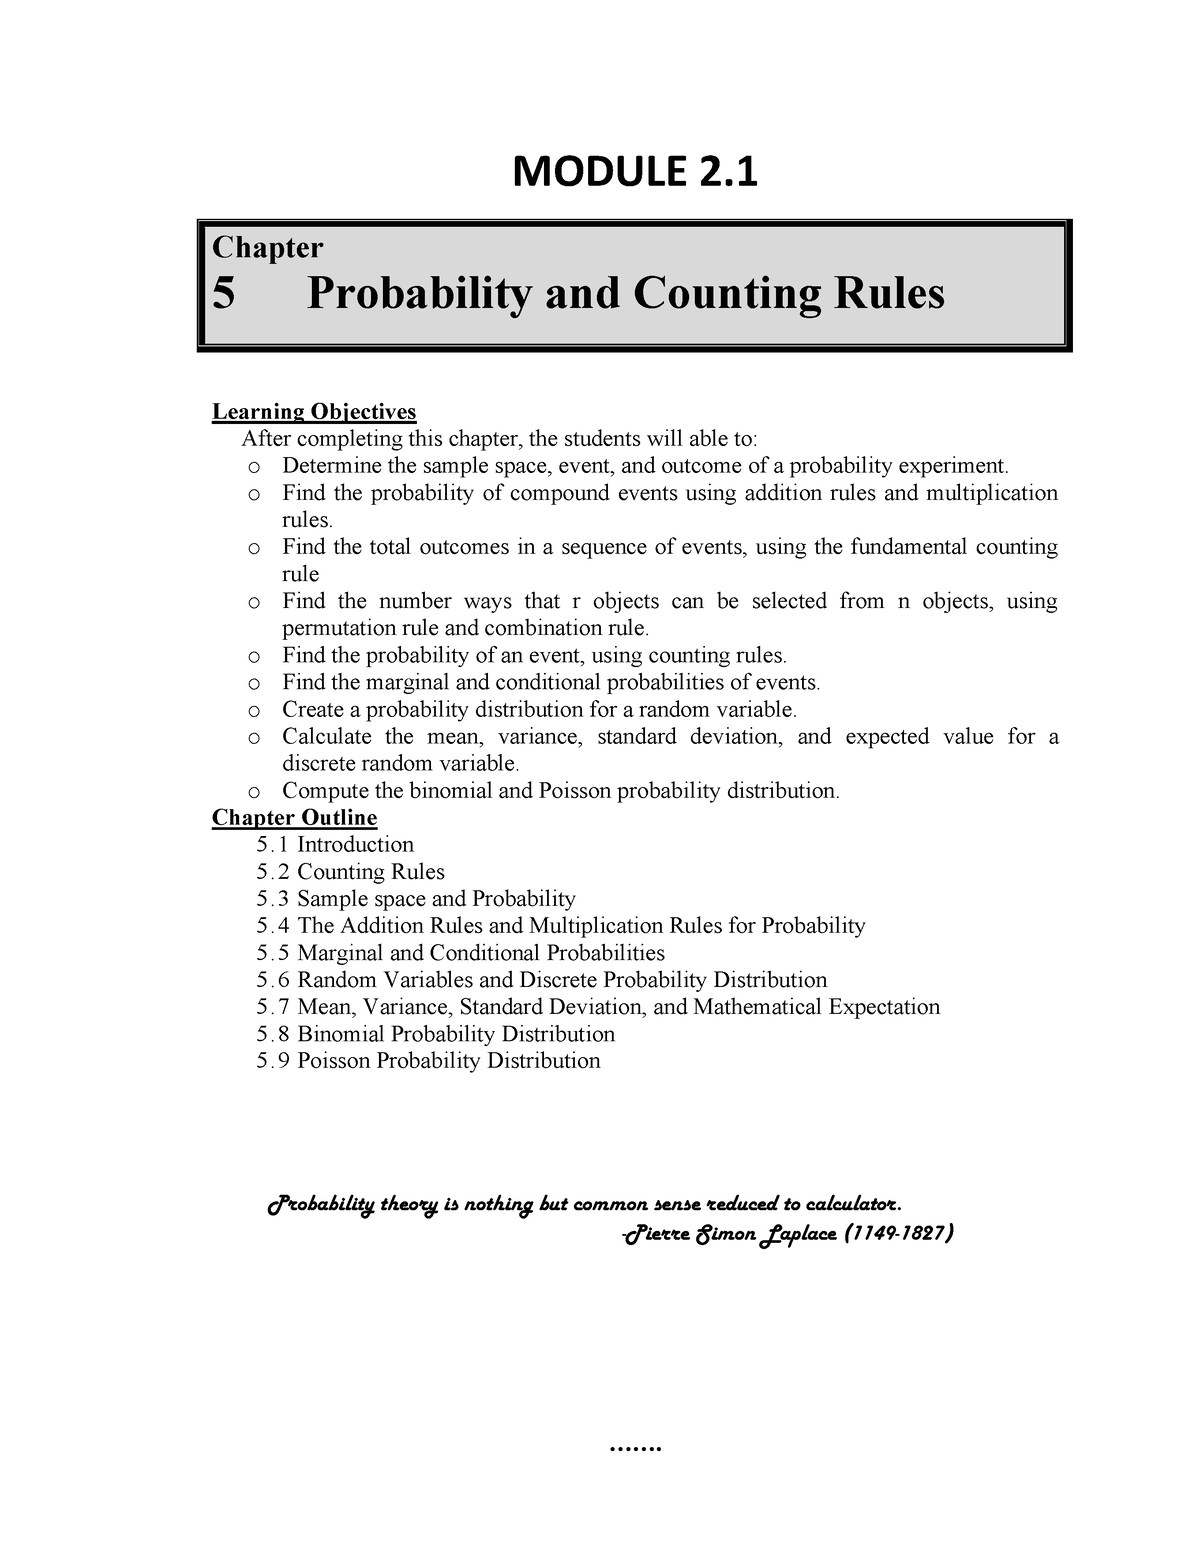 eda-module-5-probability-counting-rules-module-2-chapter-5-probability-and-counting